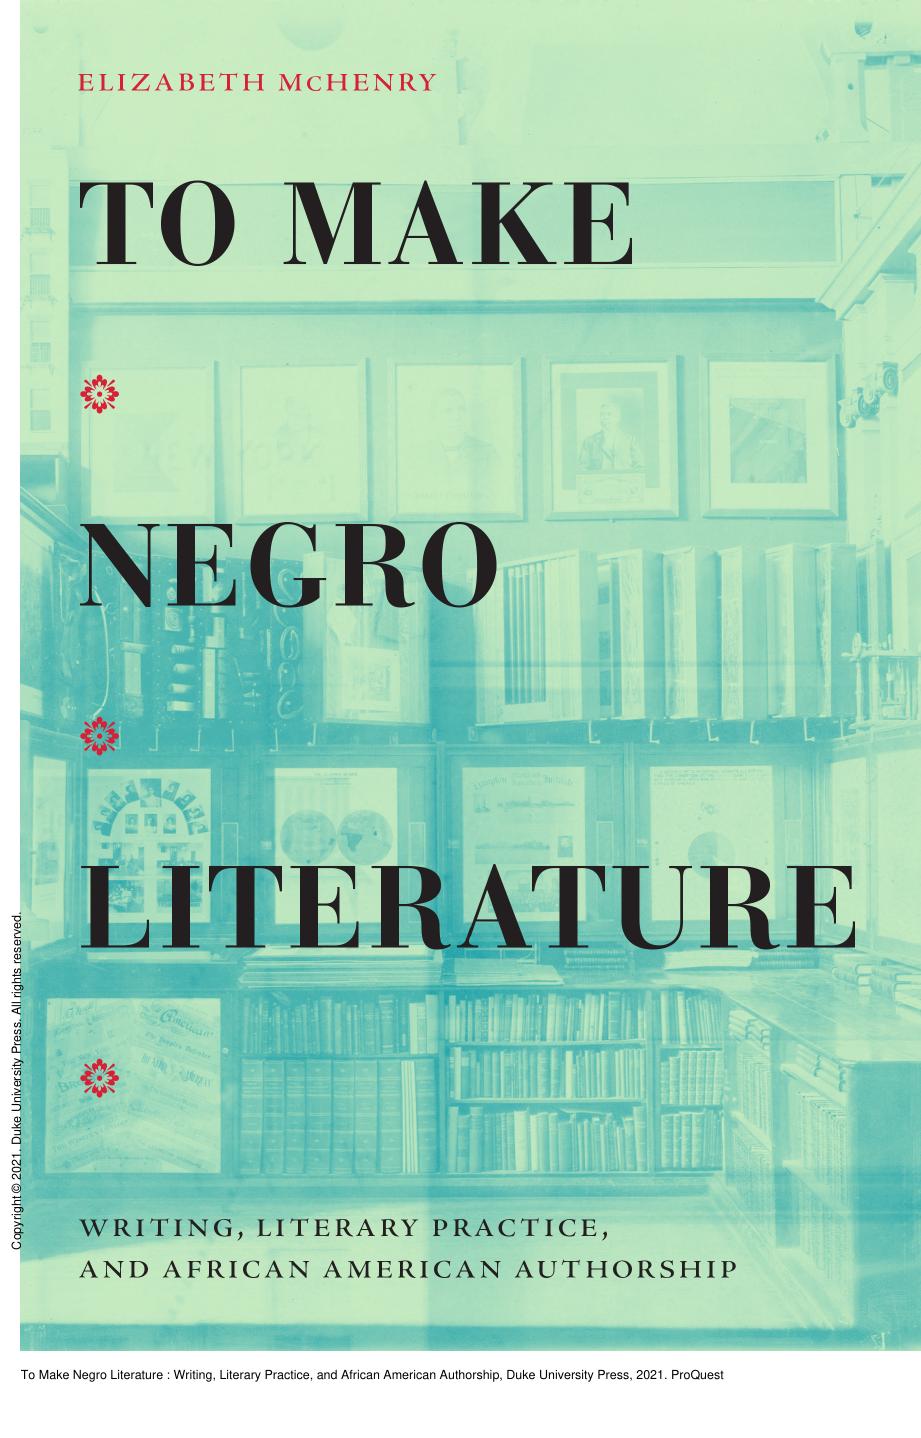 To Make Negro Literature: Writing, Literary Practice, and African American Authorship by Elizabeth McHenry